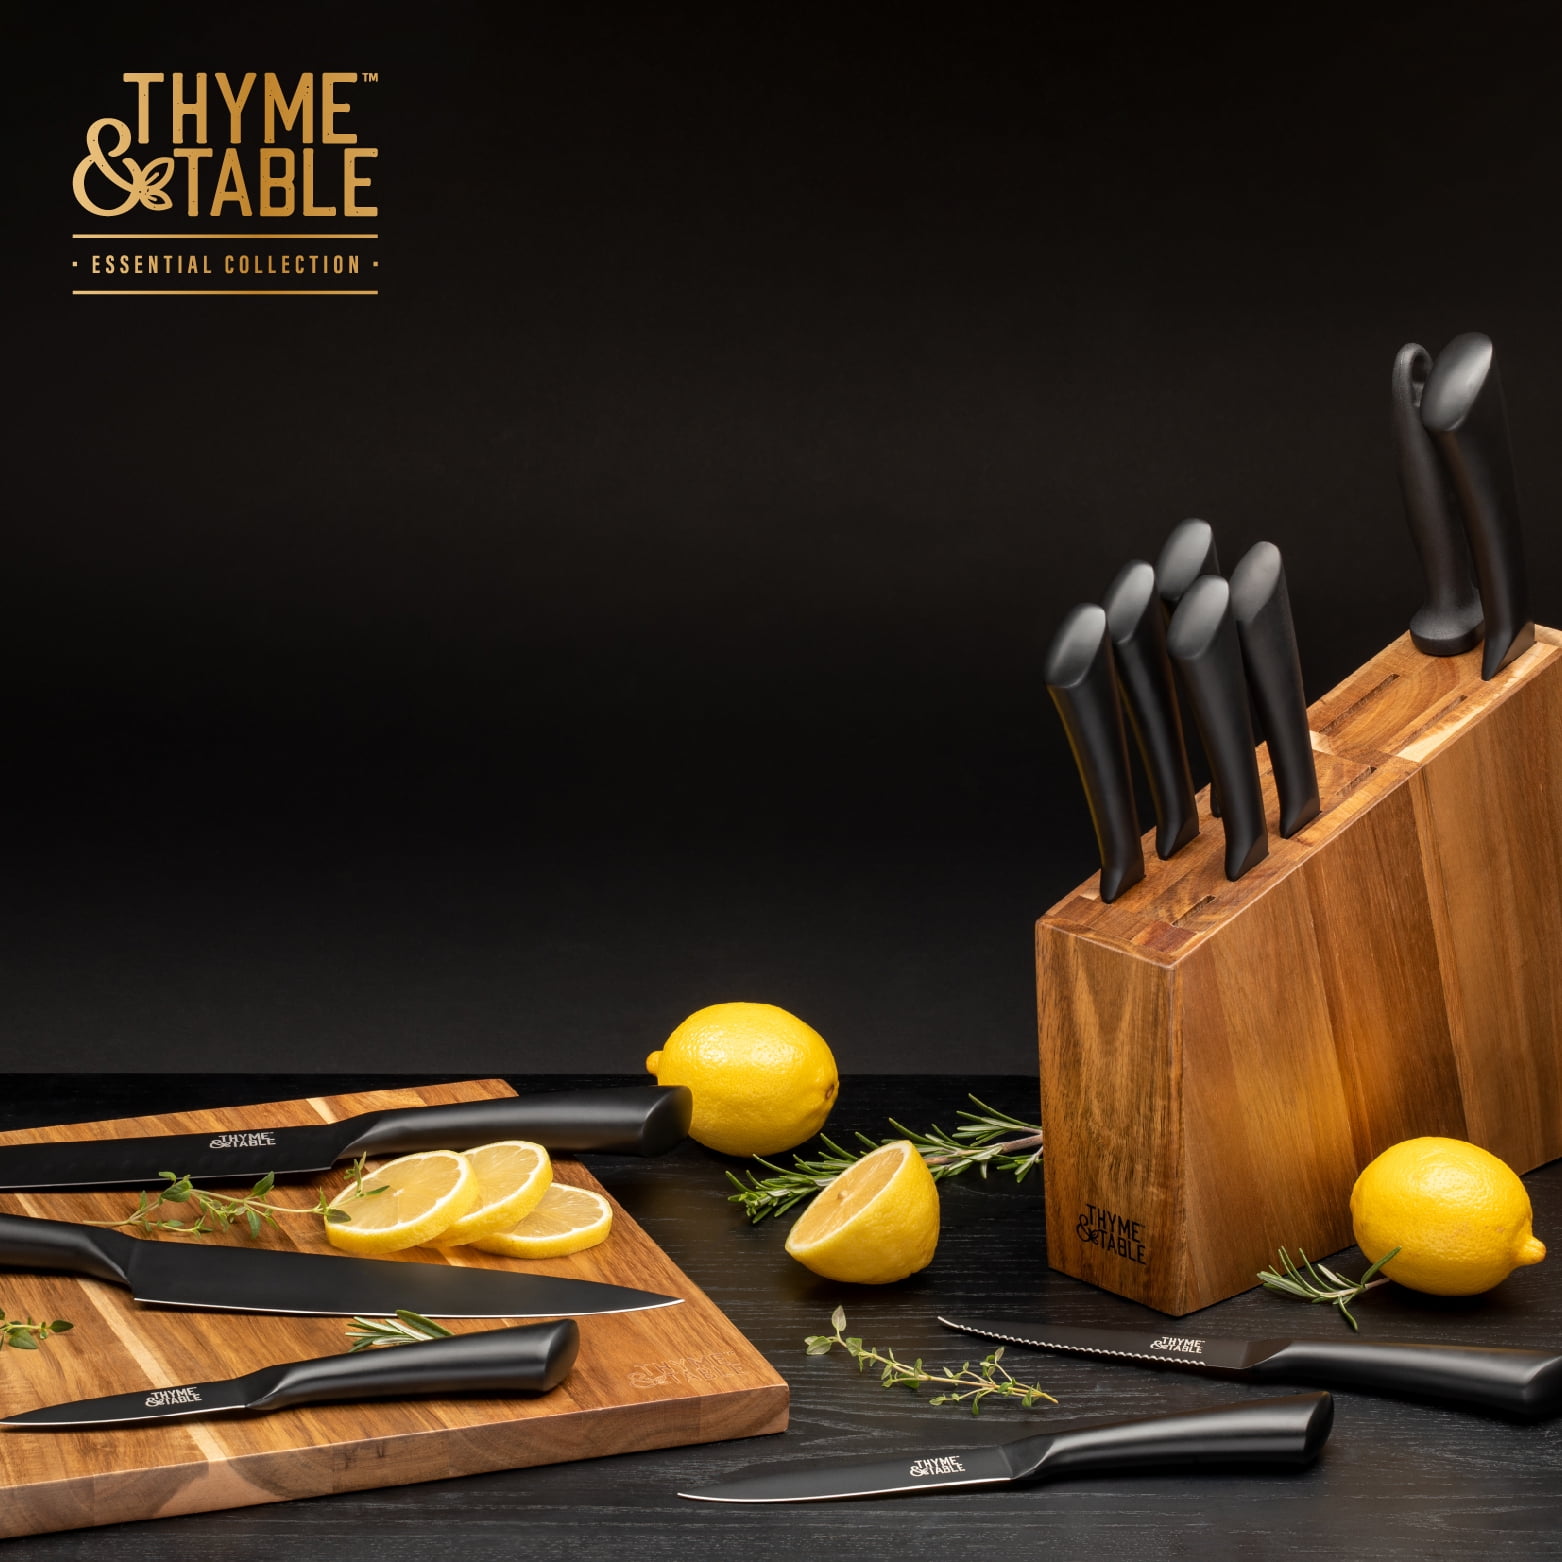 Thyme and table black friday knife set｜TikTok Search